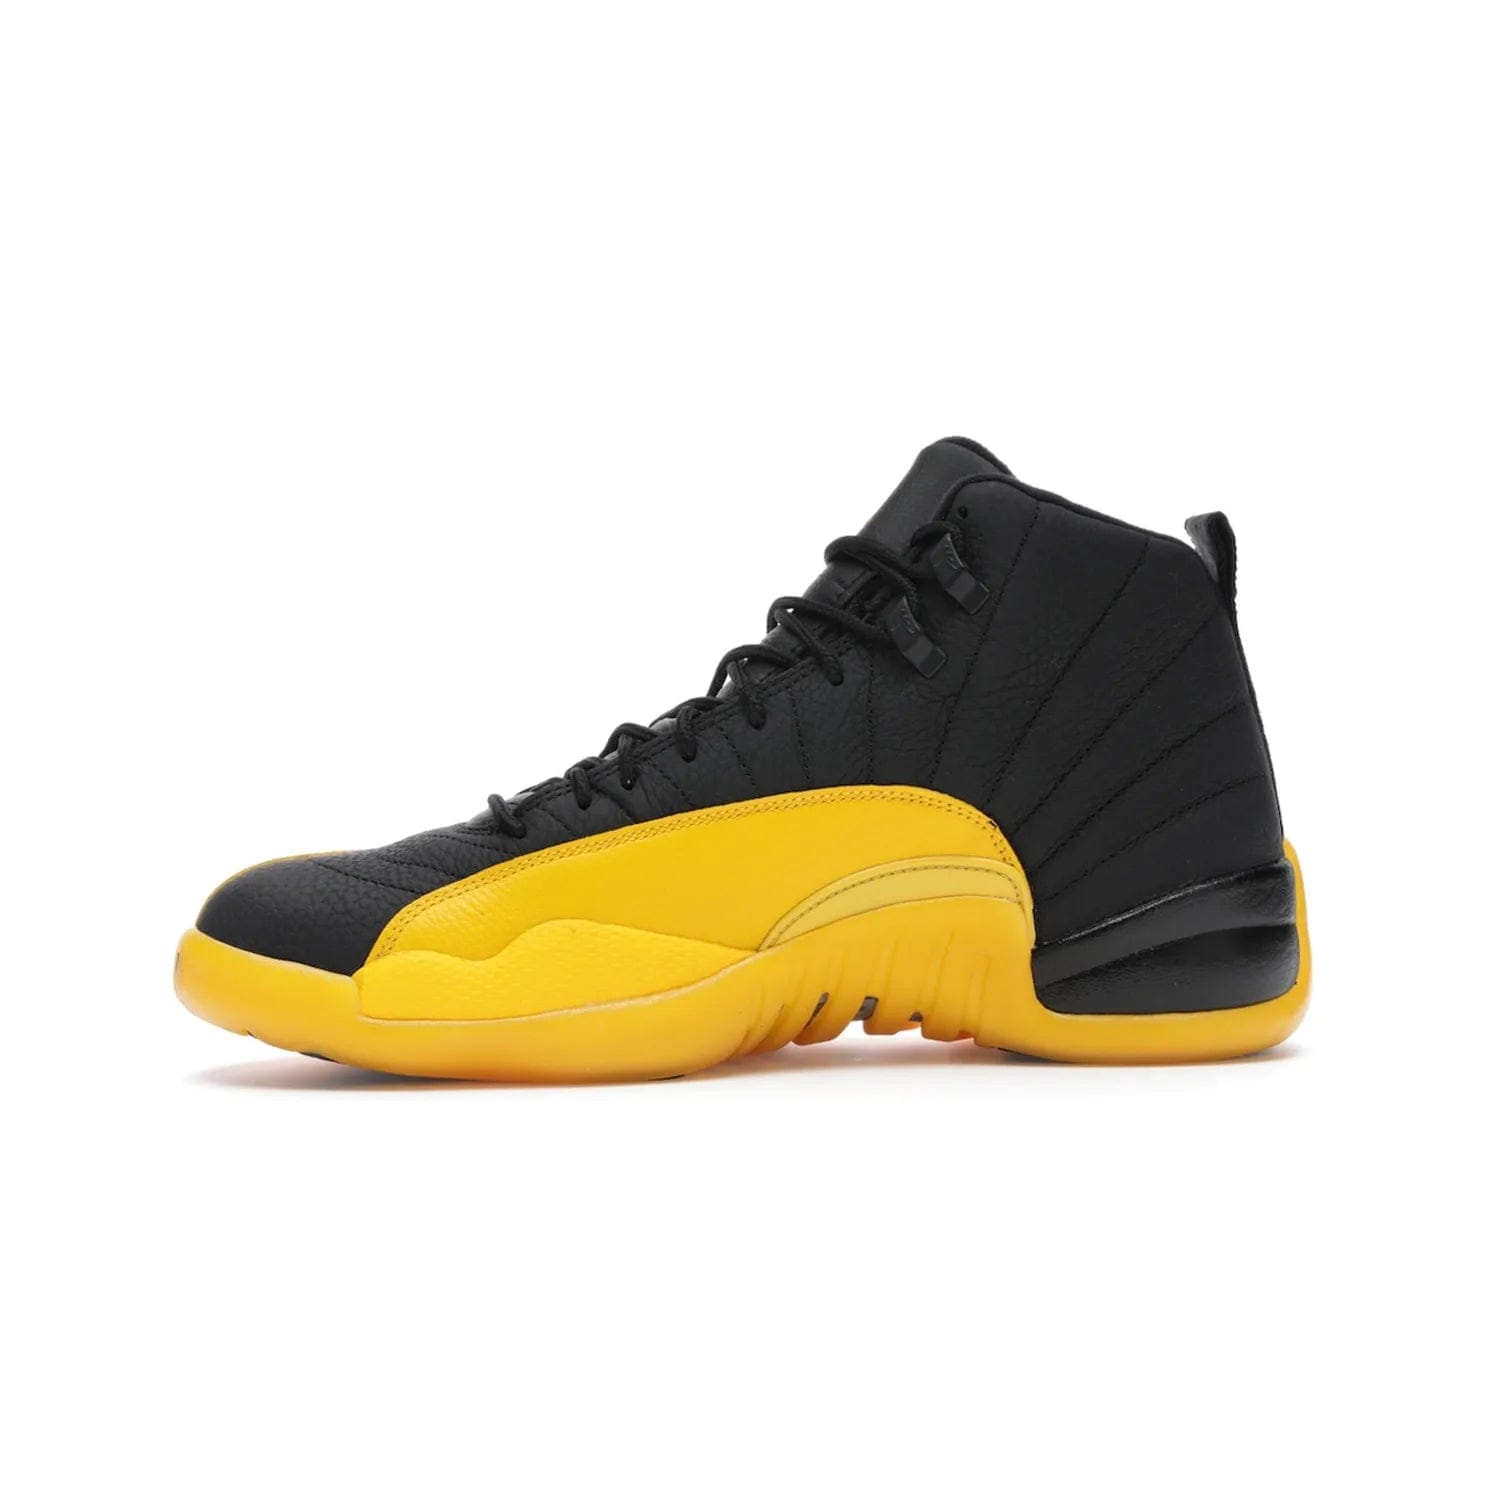 Jordan 12 Retro Black University Gold - Image 18 - Only at www.BallersClubKickz.com - This Jordan 12 Retro features a black tumbled leather upper and University Gold accents for a modern twist. Boasting Jordan "Two Three" branding and a yellow sole, these shoes will elevate your wardrobe. Fresh, sleek, and one of a kind - the Jordan 12 University Gold is your summer sneaker.